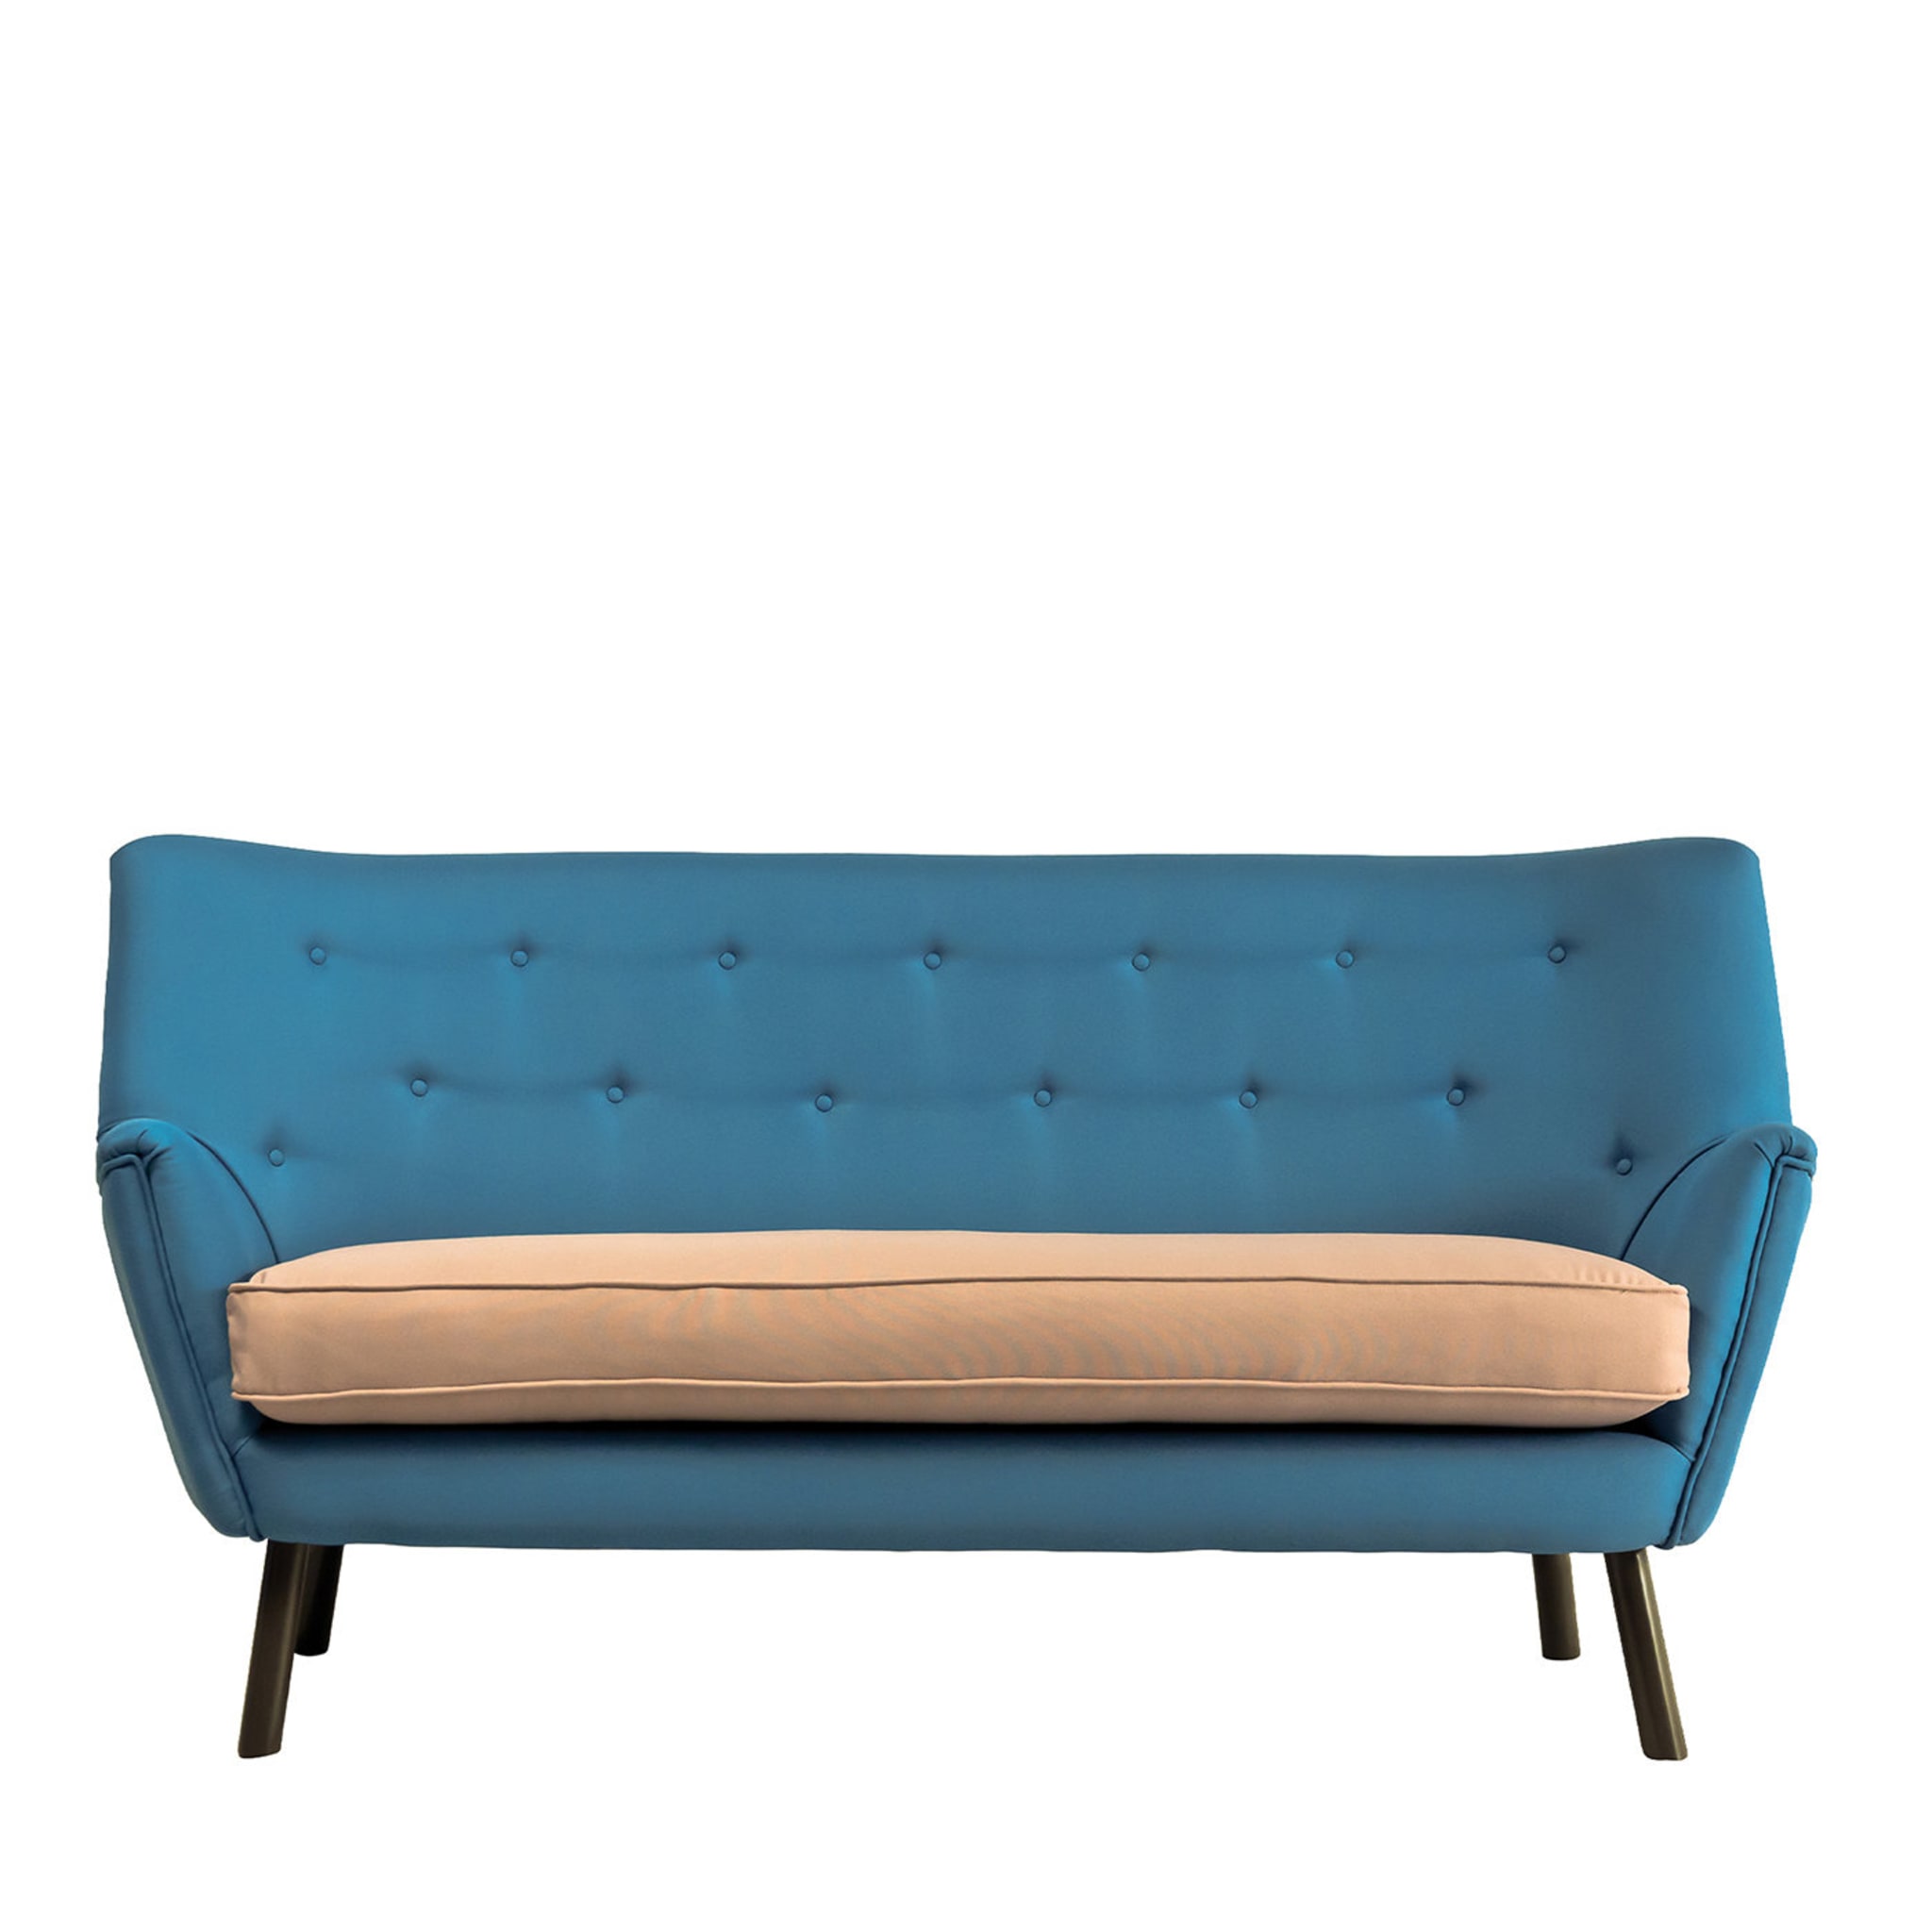 Blue and Beige Sofa - Main view